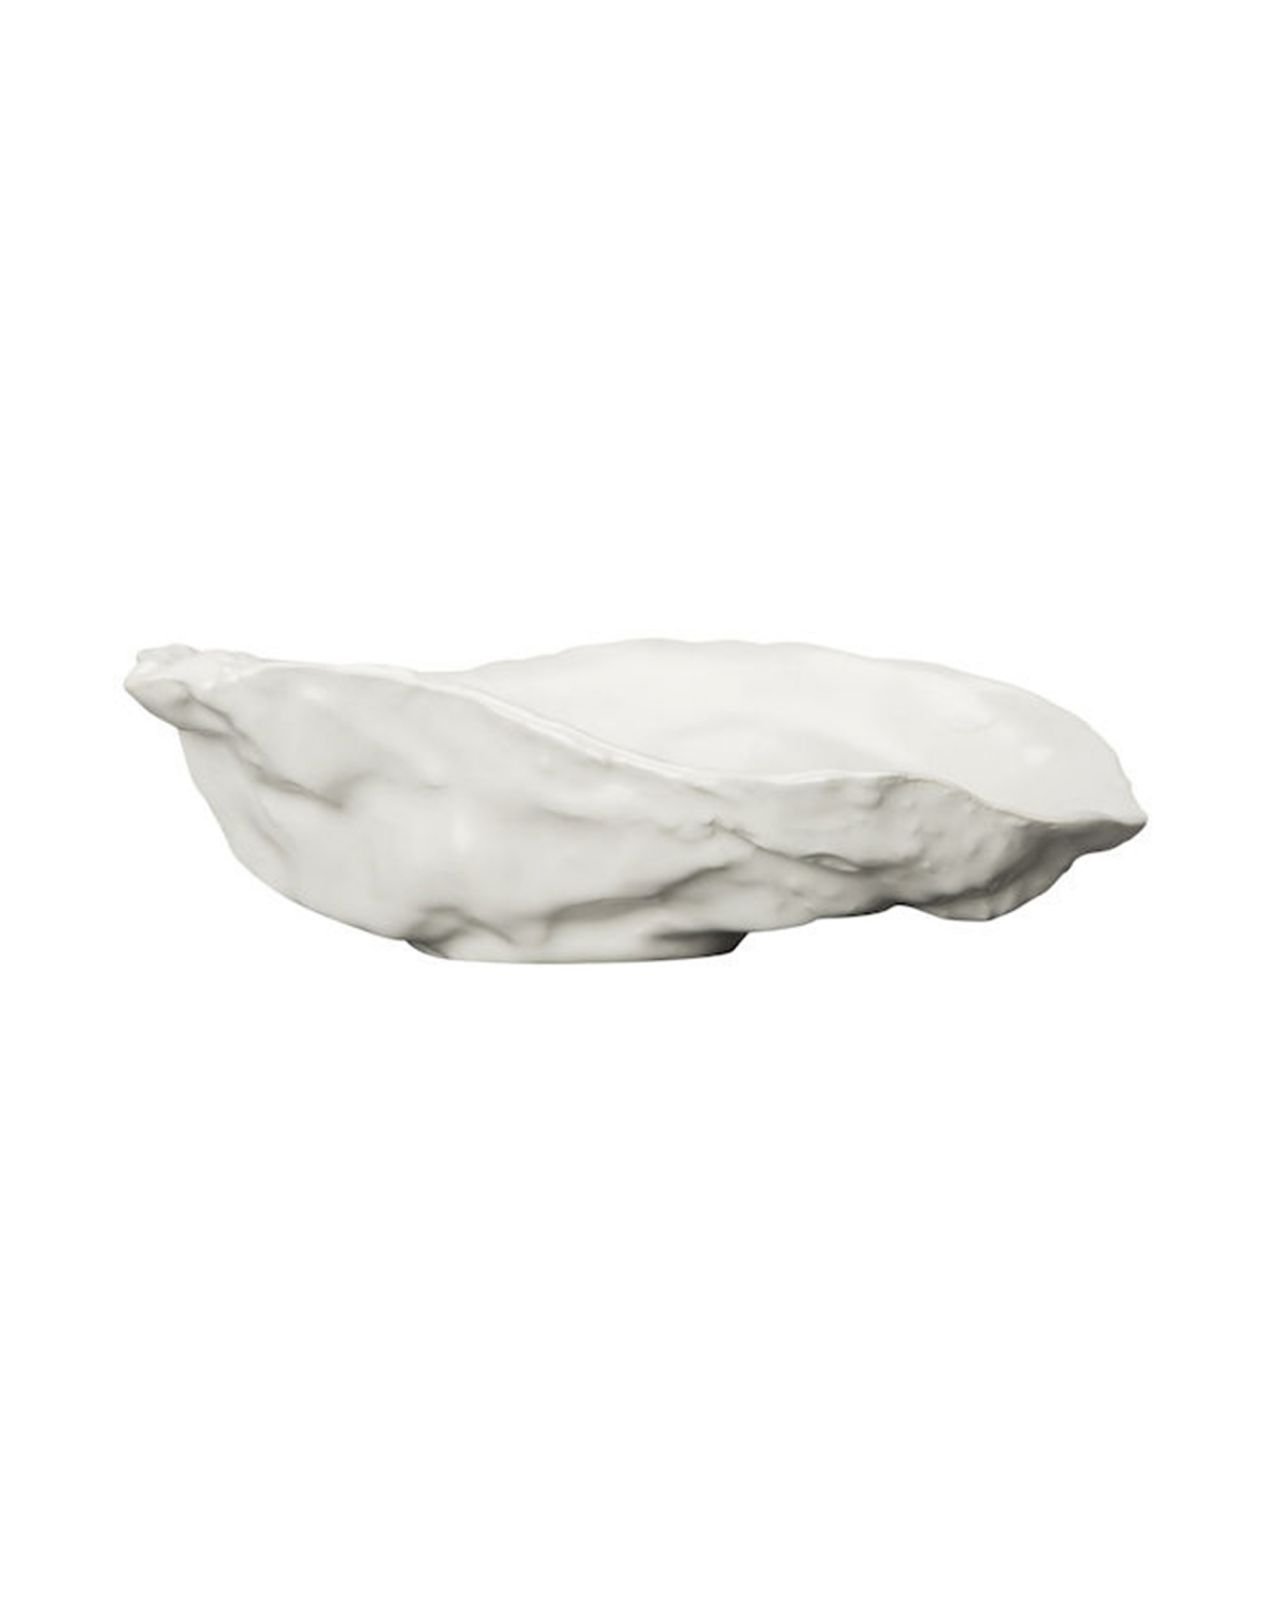 Oyster serving bowl white